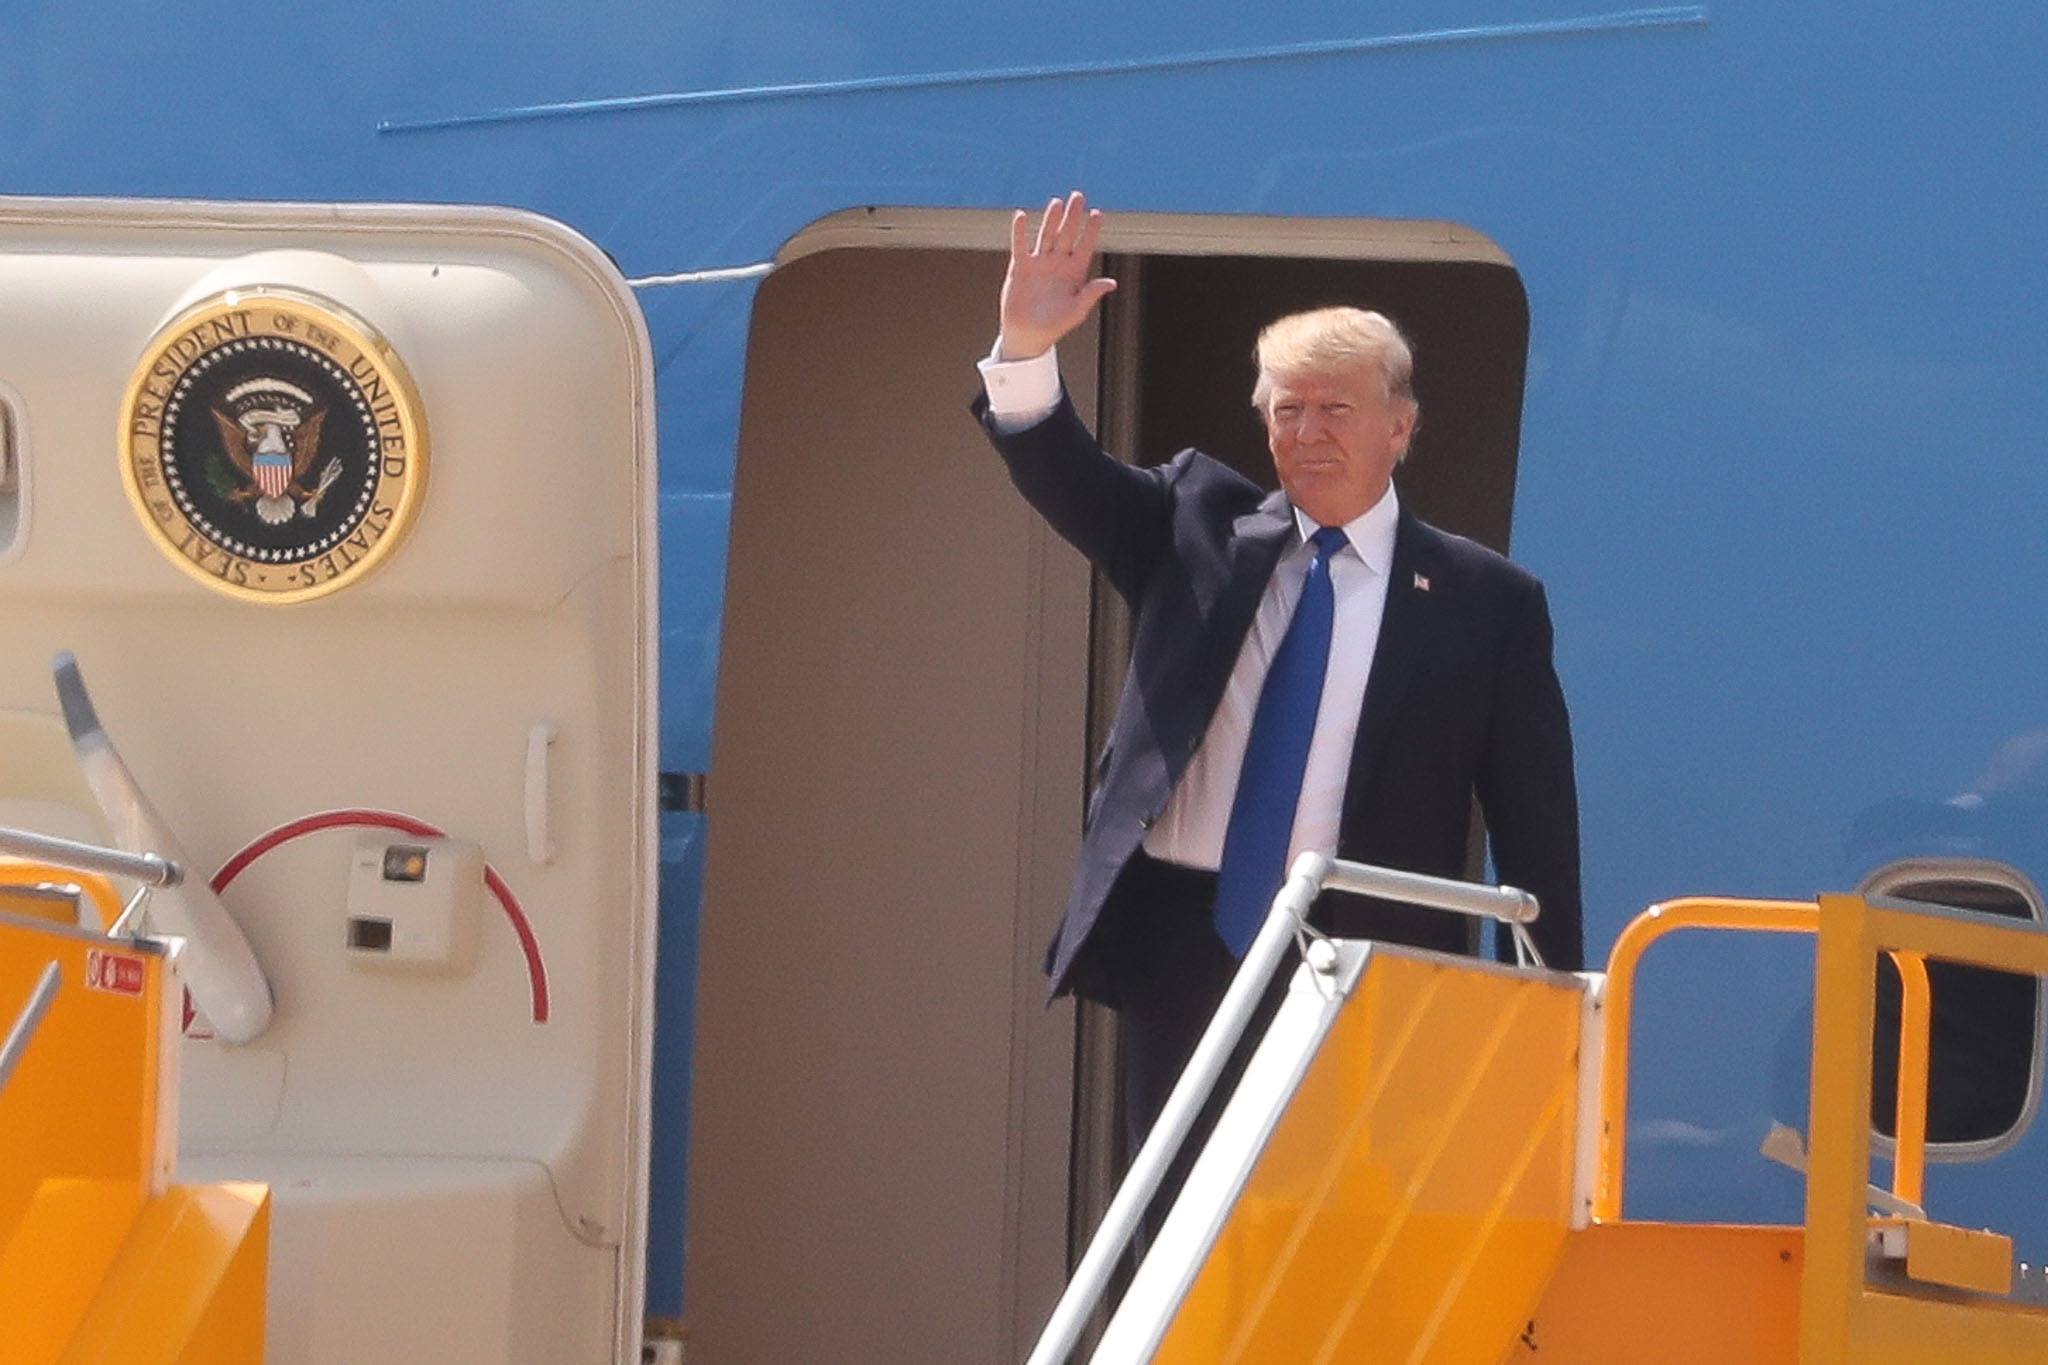 Trump touches down in Vietnam, to meet with Putin at APEC in Da Nang